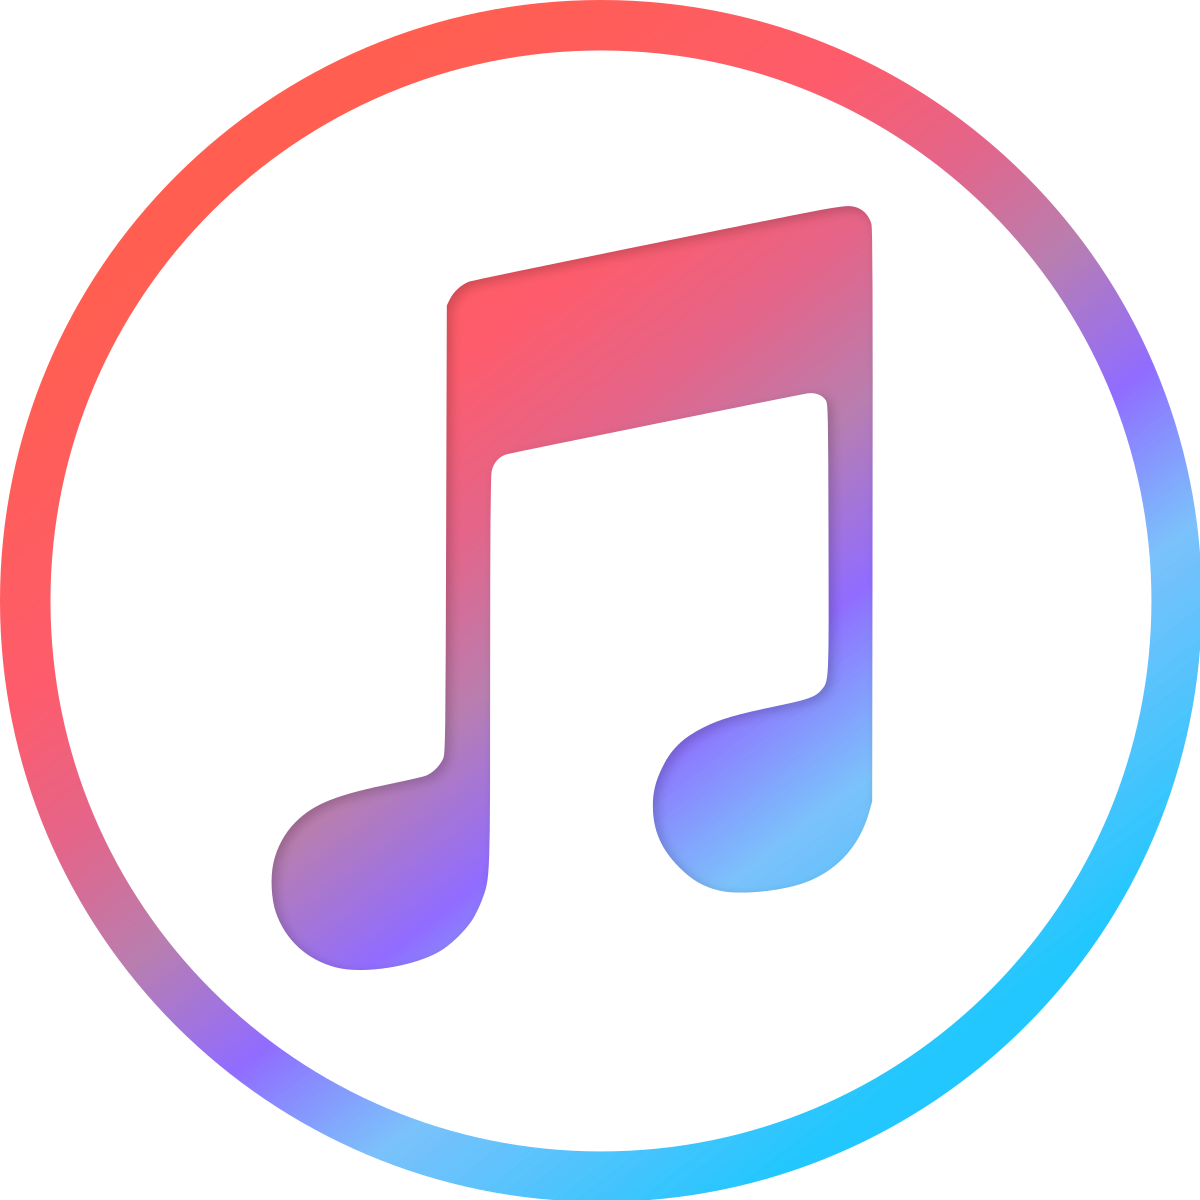 Say Goodbye To Beats Music Apple Take Its Place - Beats Music, HD Png  Download , Transparent Png Image - PNGitem